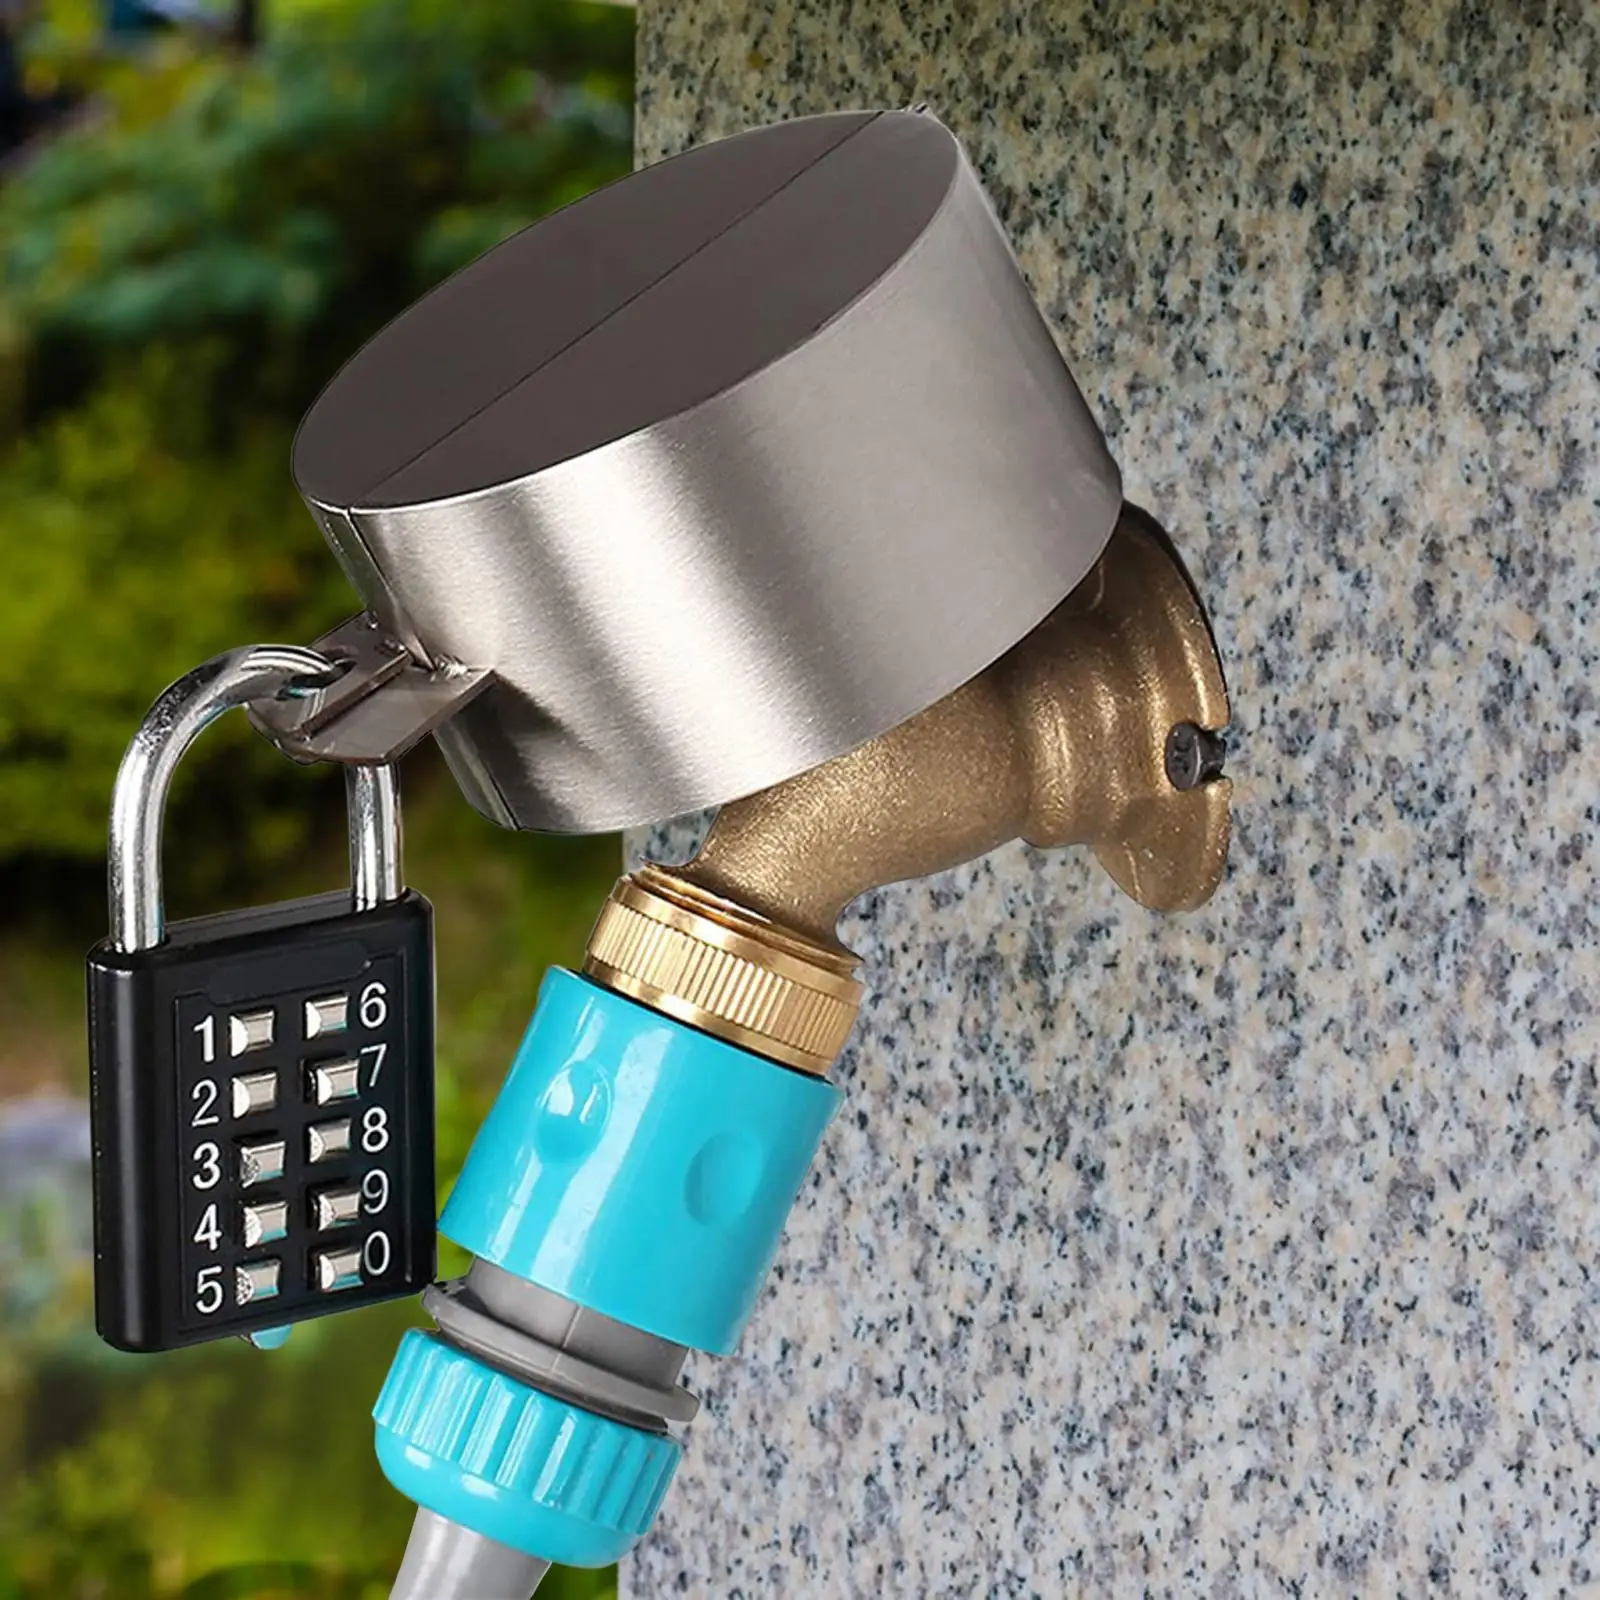 Outdoor Faucet Cover Locks System Easy to Use Multifunctional Retaining Device Gate Faucet Locking Device for Outdoor Garden